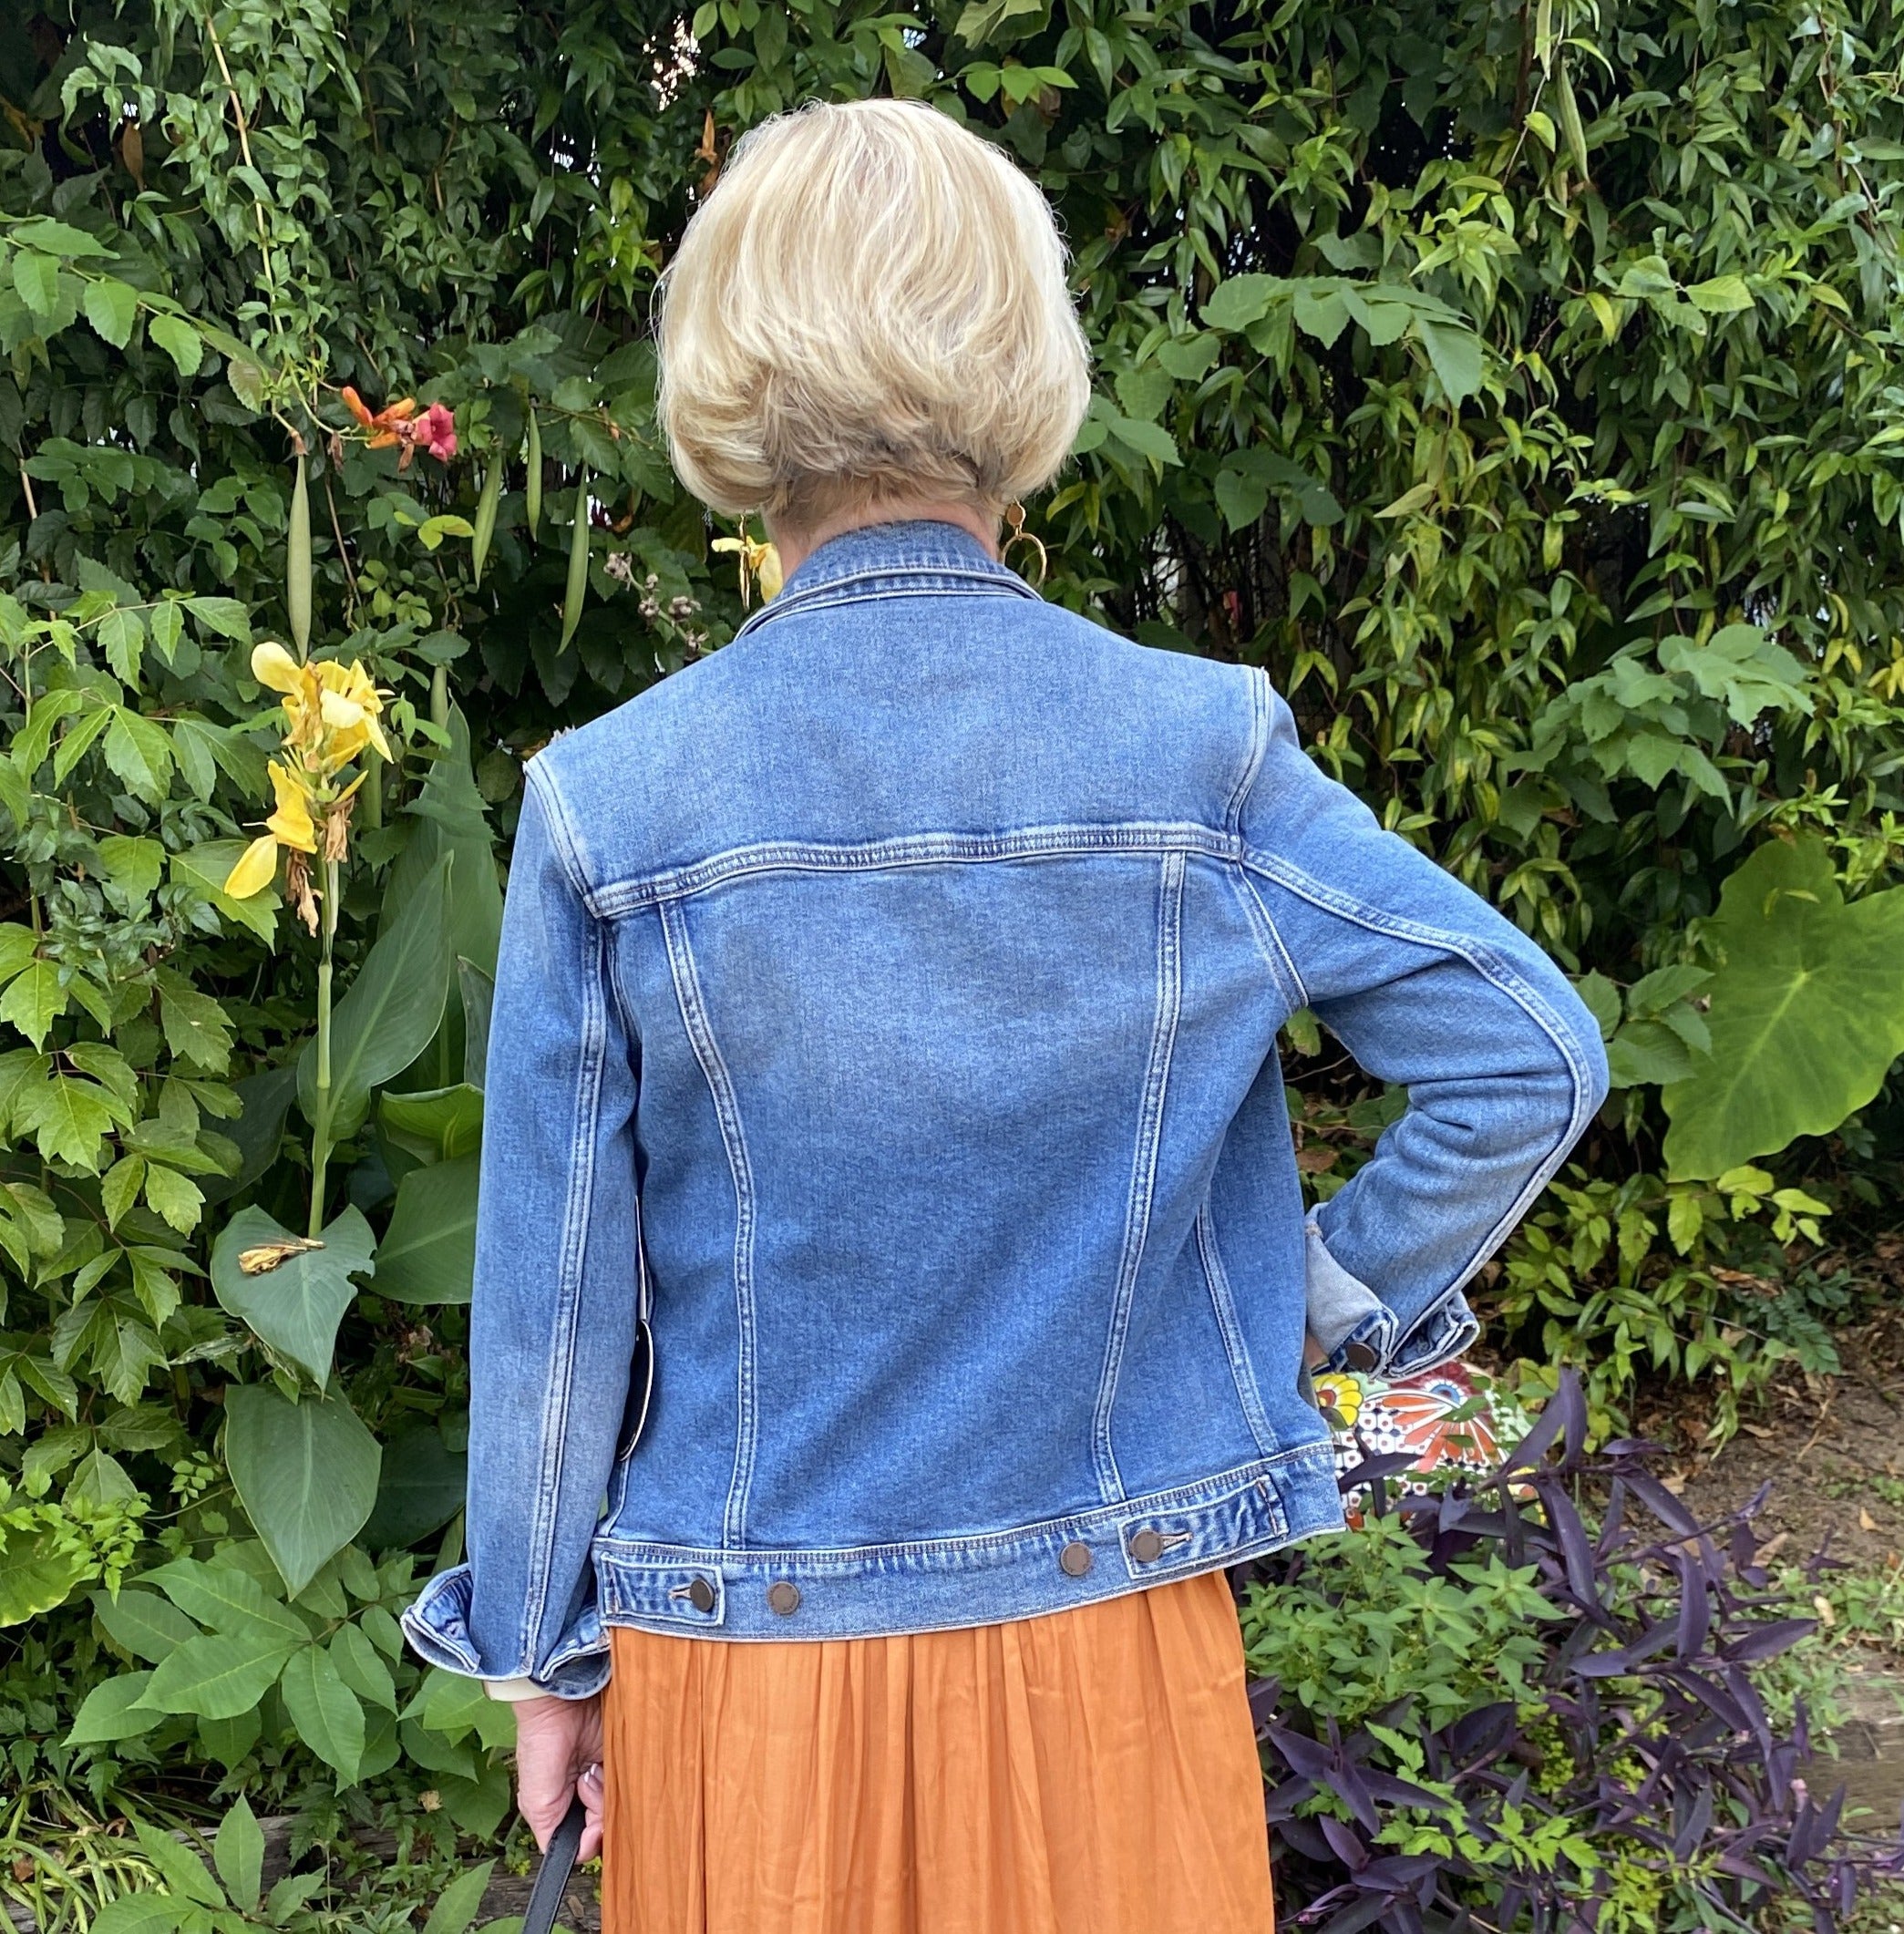 The back of the denim jacket has great stitching detail, and shows the feminine fit. 